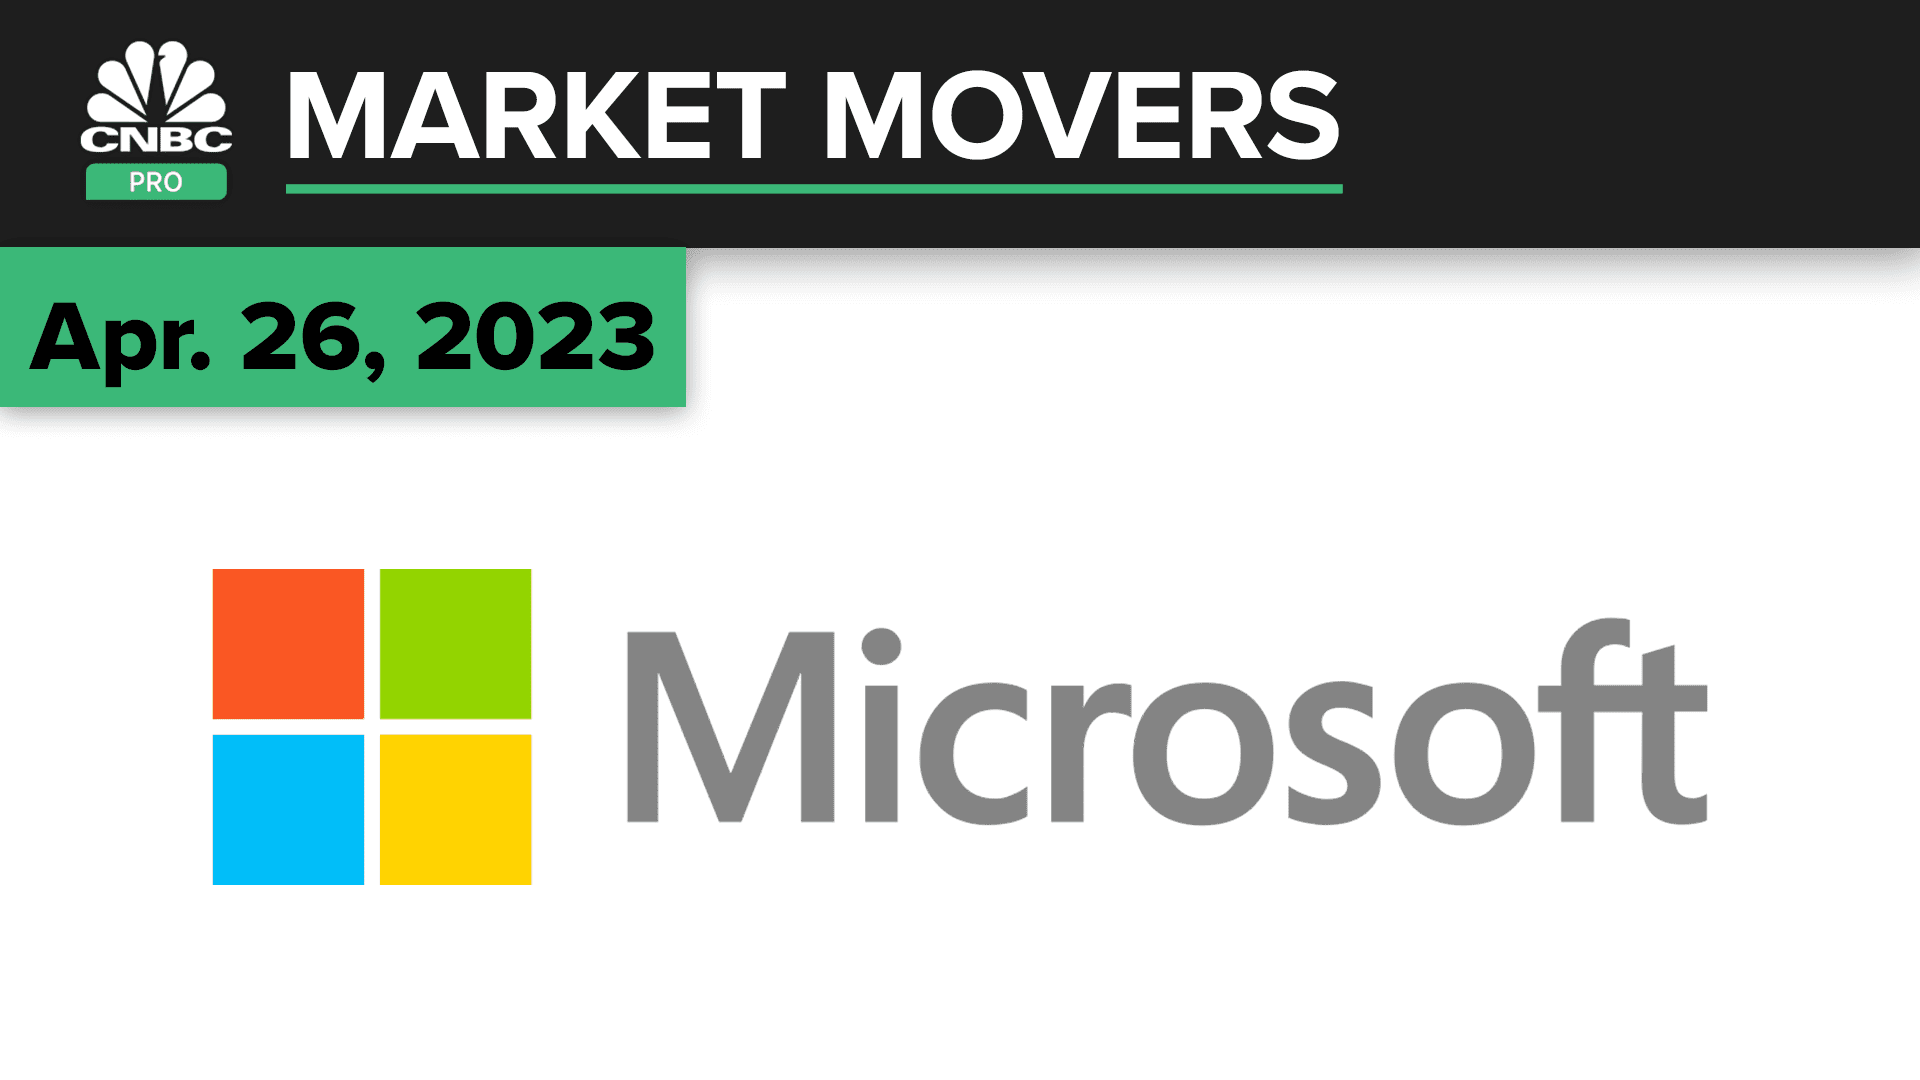 Microsoft shares rose on strong results.Here's what could happen to the tech giant